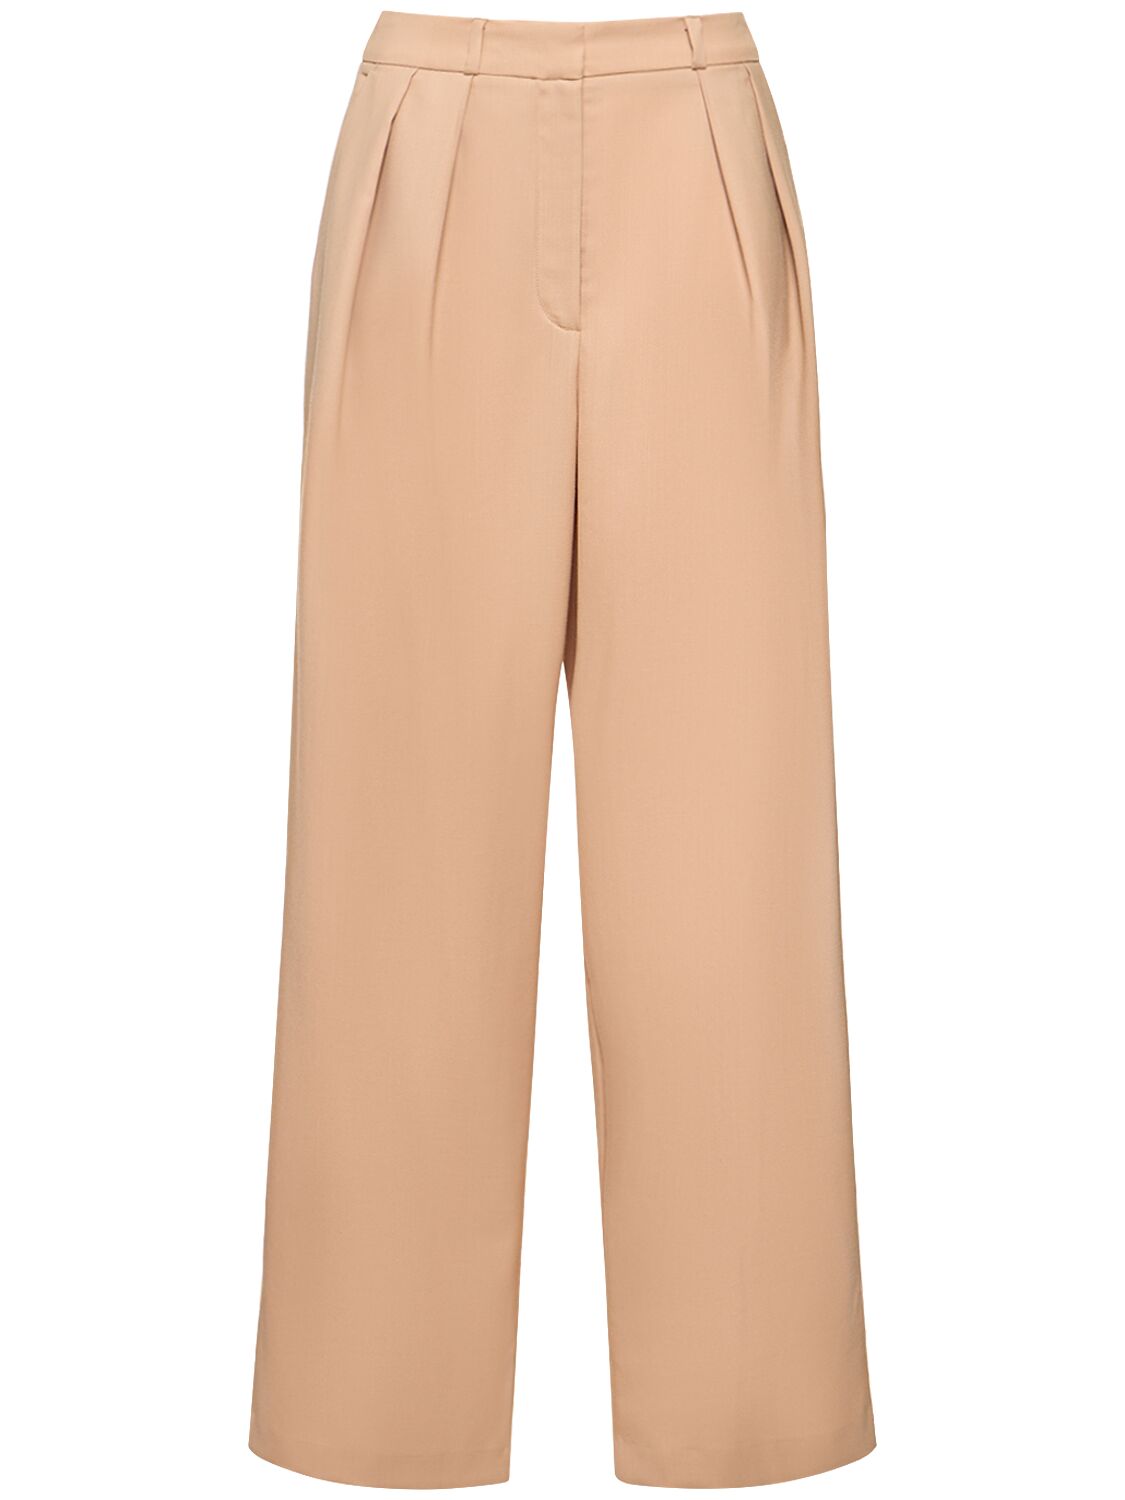 Image of Tansy Pleated Twill Wool Blend Pants